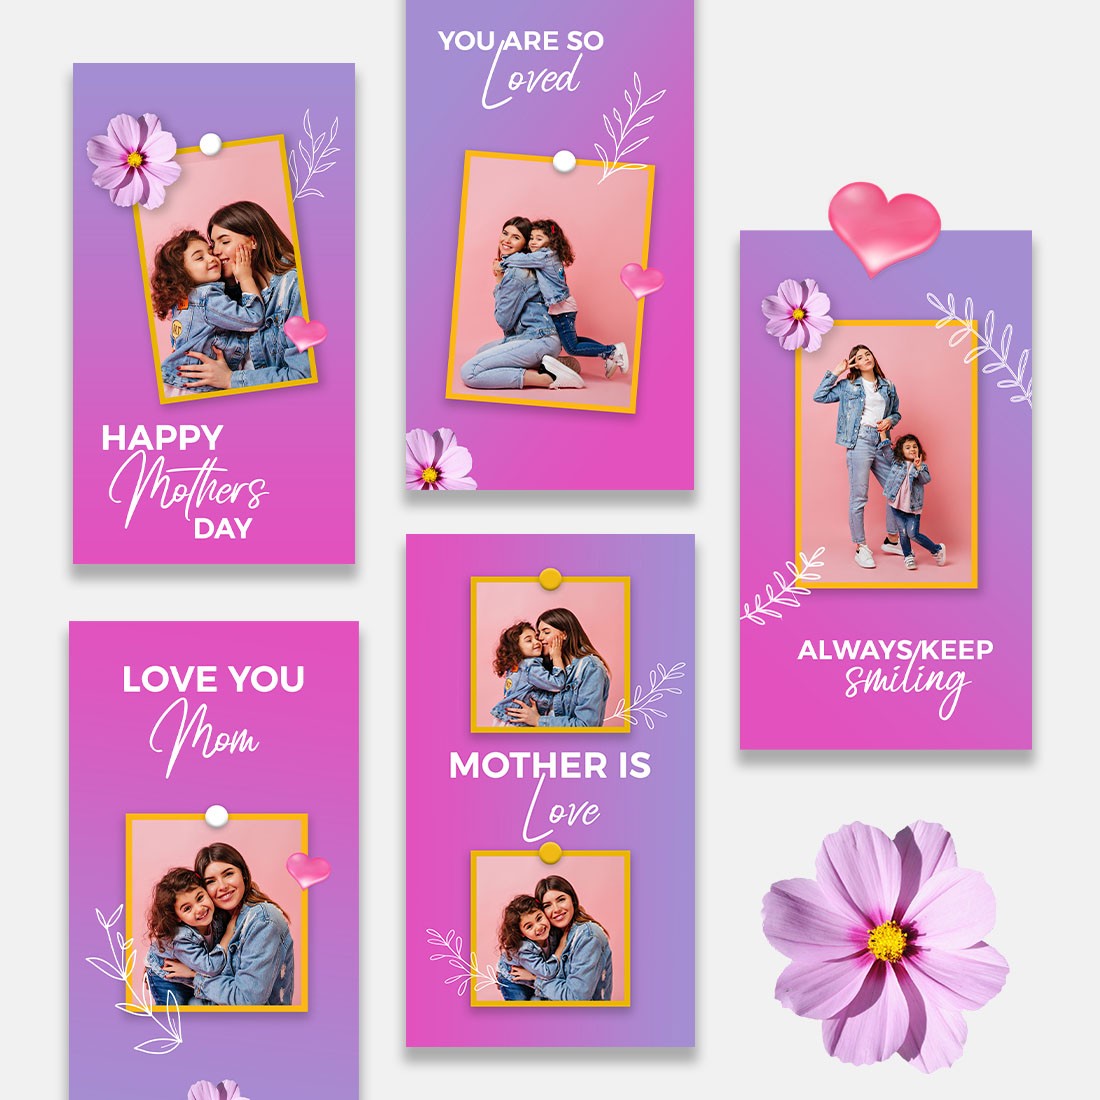 5 Mother's Day Instagram Story Templates cover image.